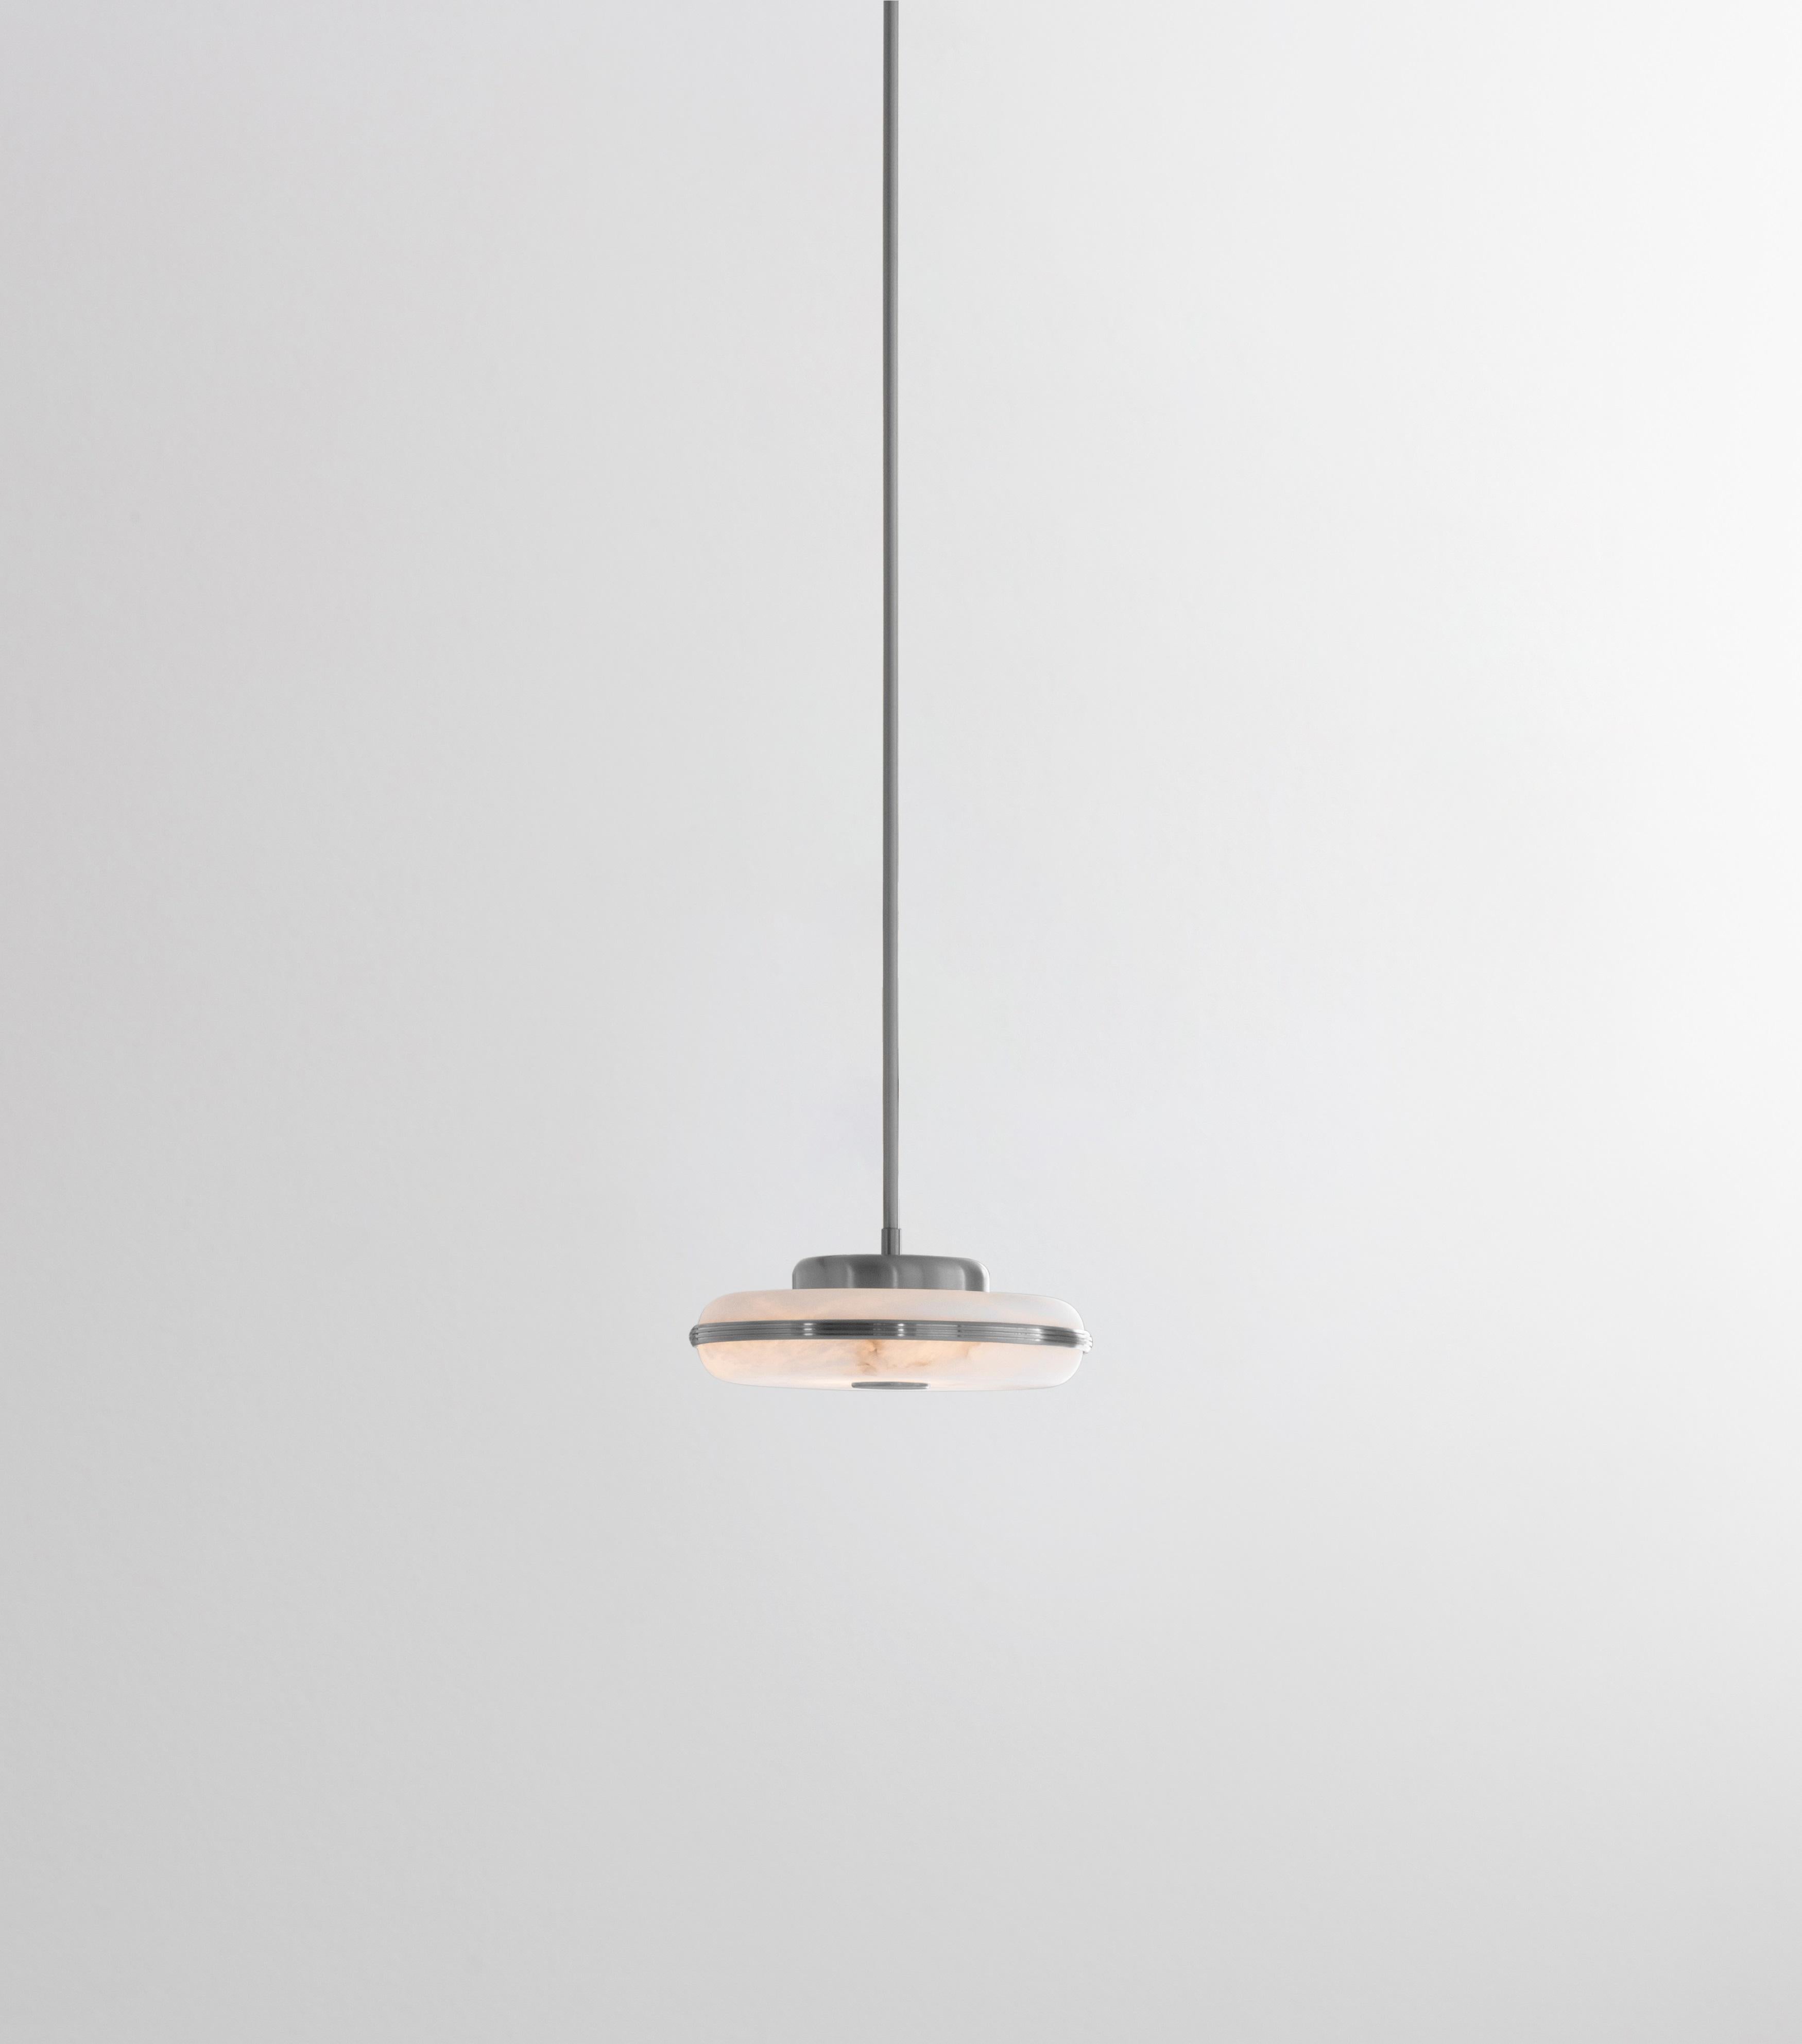 Beran Satin Nickel Small Pendant Lamp by Bert Frank
Dimensions: Ø 26 x H 6 cm. 
Materials: Satin Nickel and alabaster.

Available in two different sizes. Available in different finishes and materials. Height is customized to order. Please contact